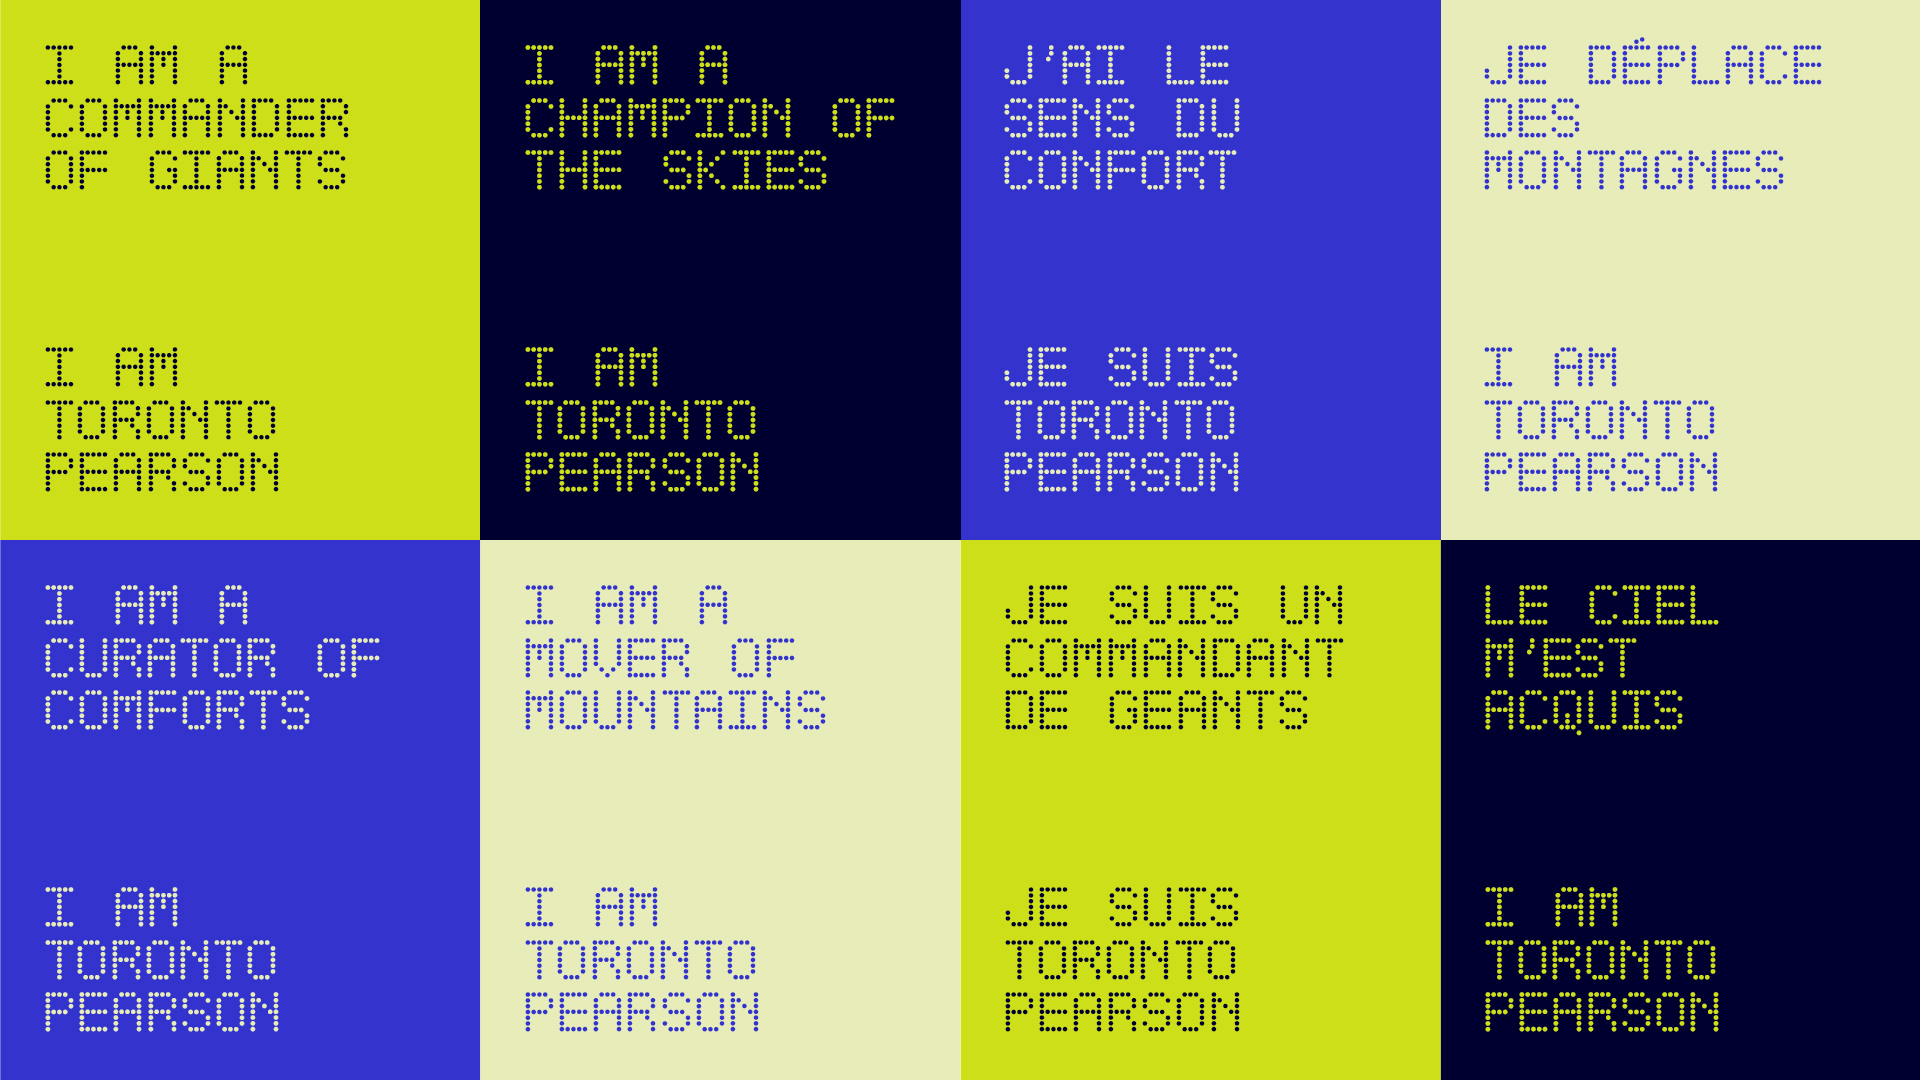 Picture with various catchprases for the Toronto Pearson Airport, using the font designed for their brand identity